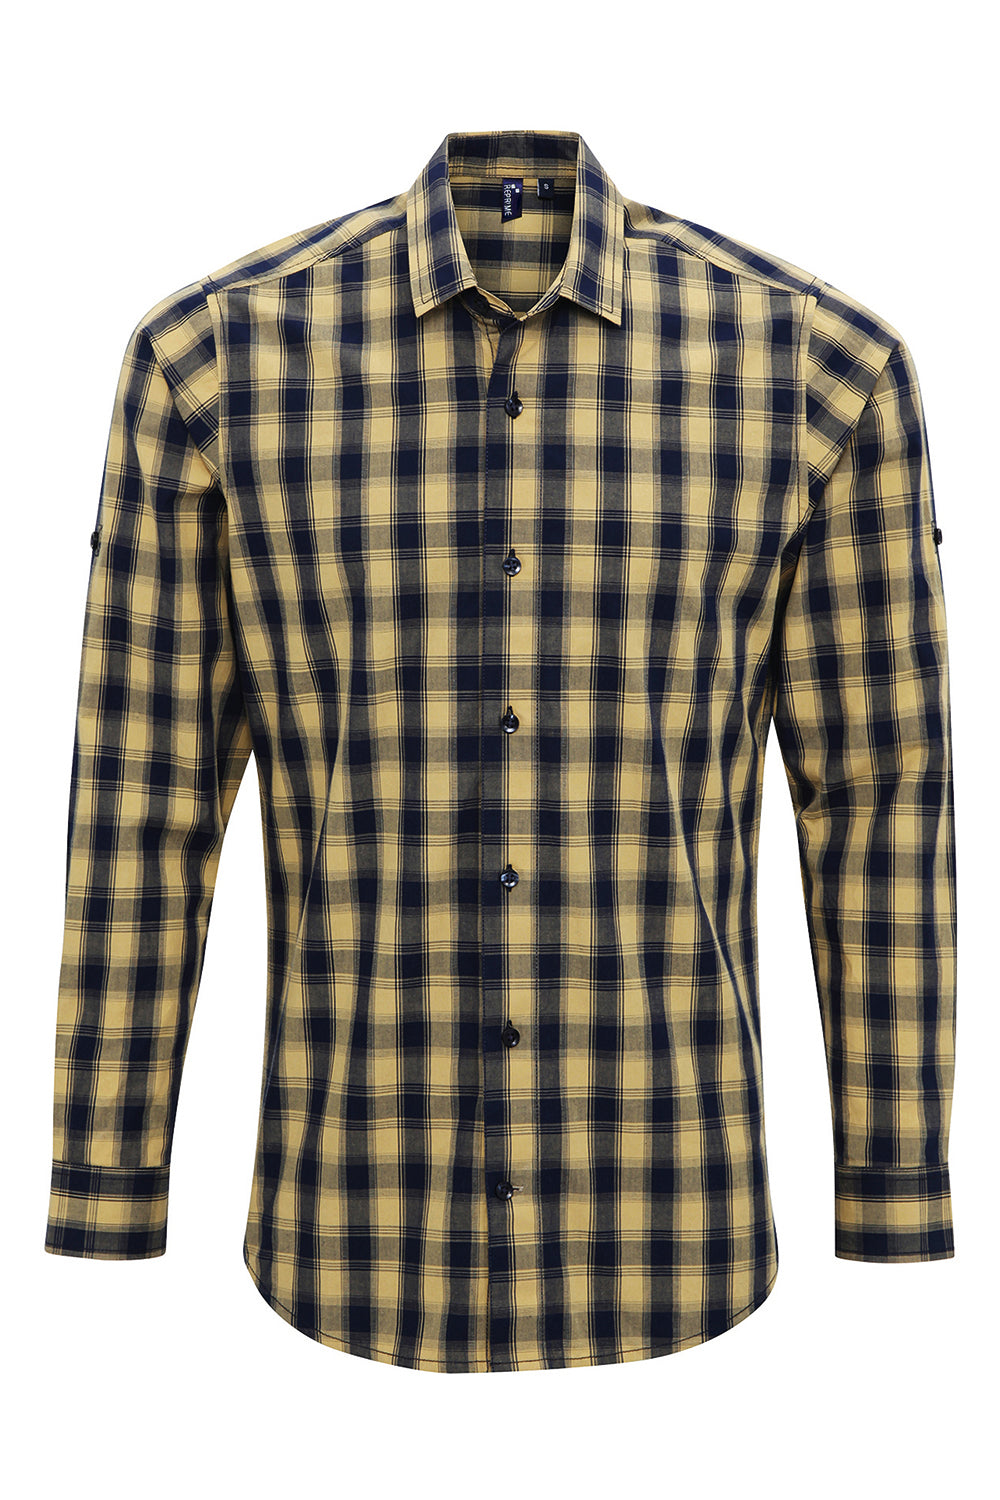 Artisan Collection RP250 Mens Mulligan Check Long Sleeve Button Down Shirt Camel Brown/Navy Blue Model Flat Front